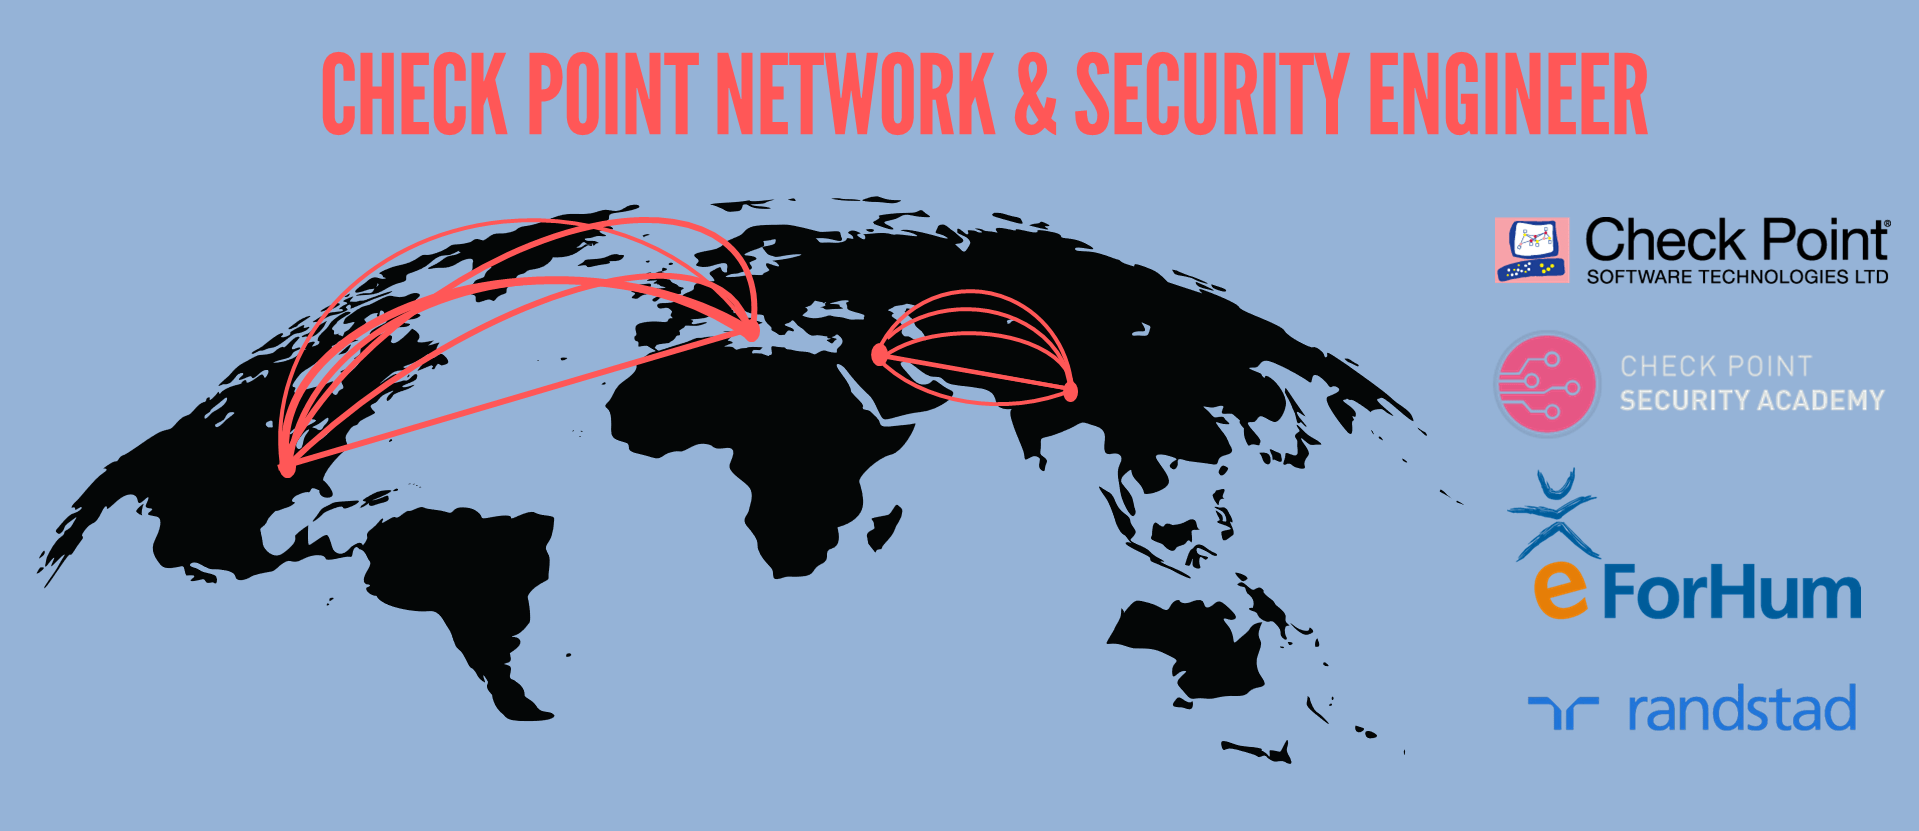 Network & Security Engineer Check Point